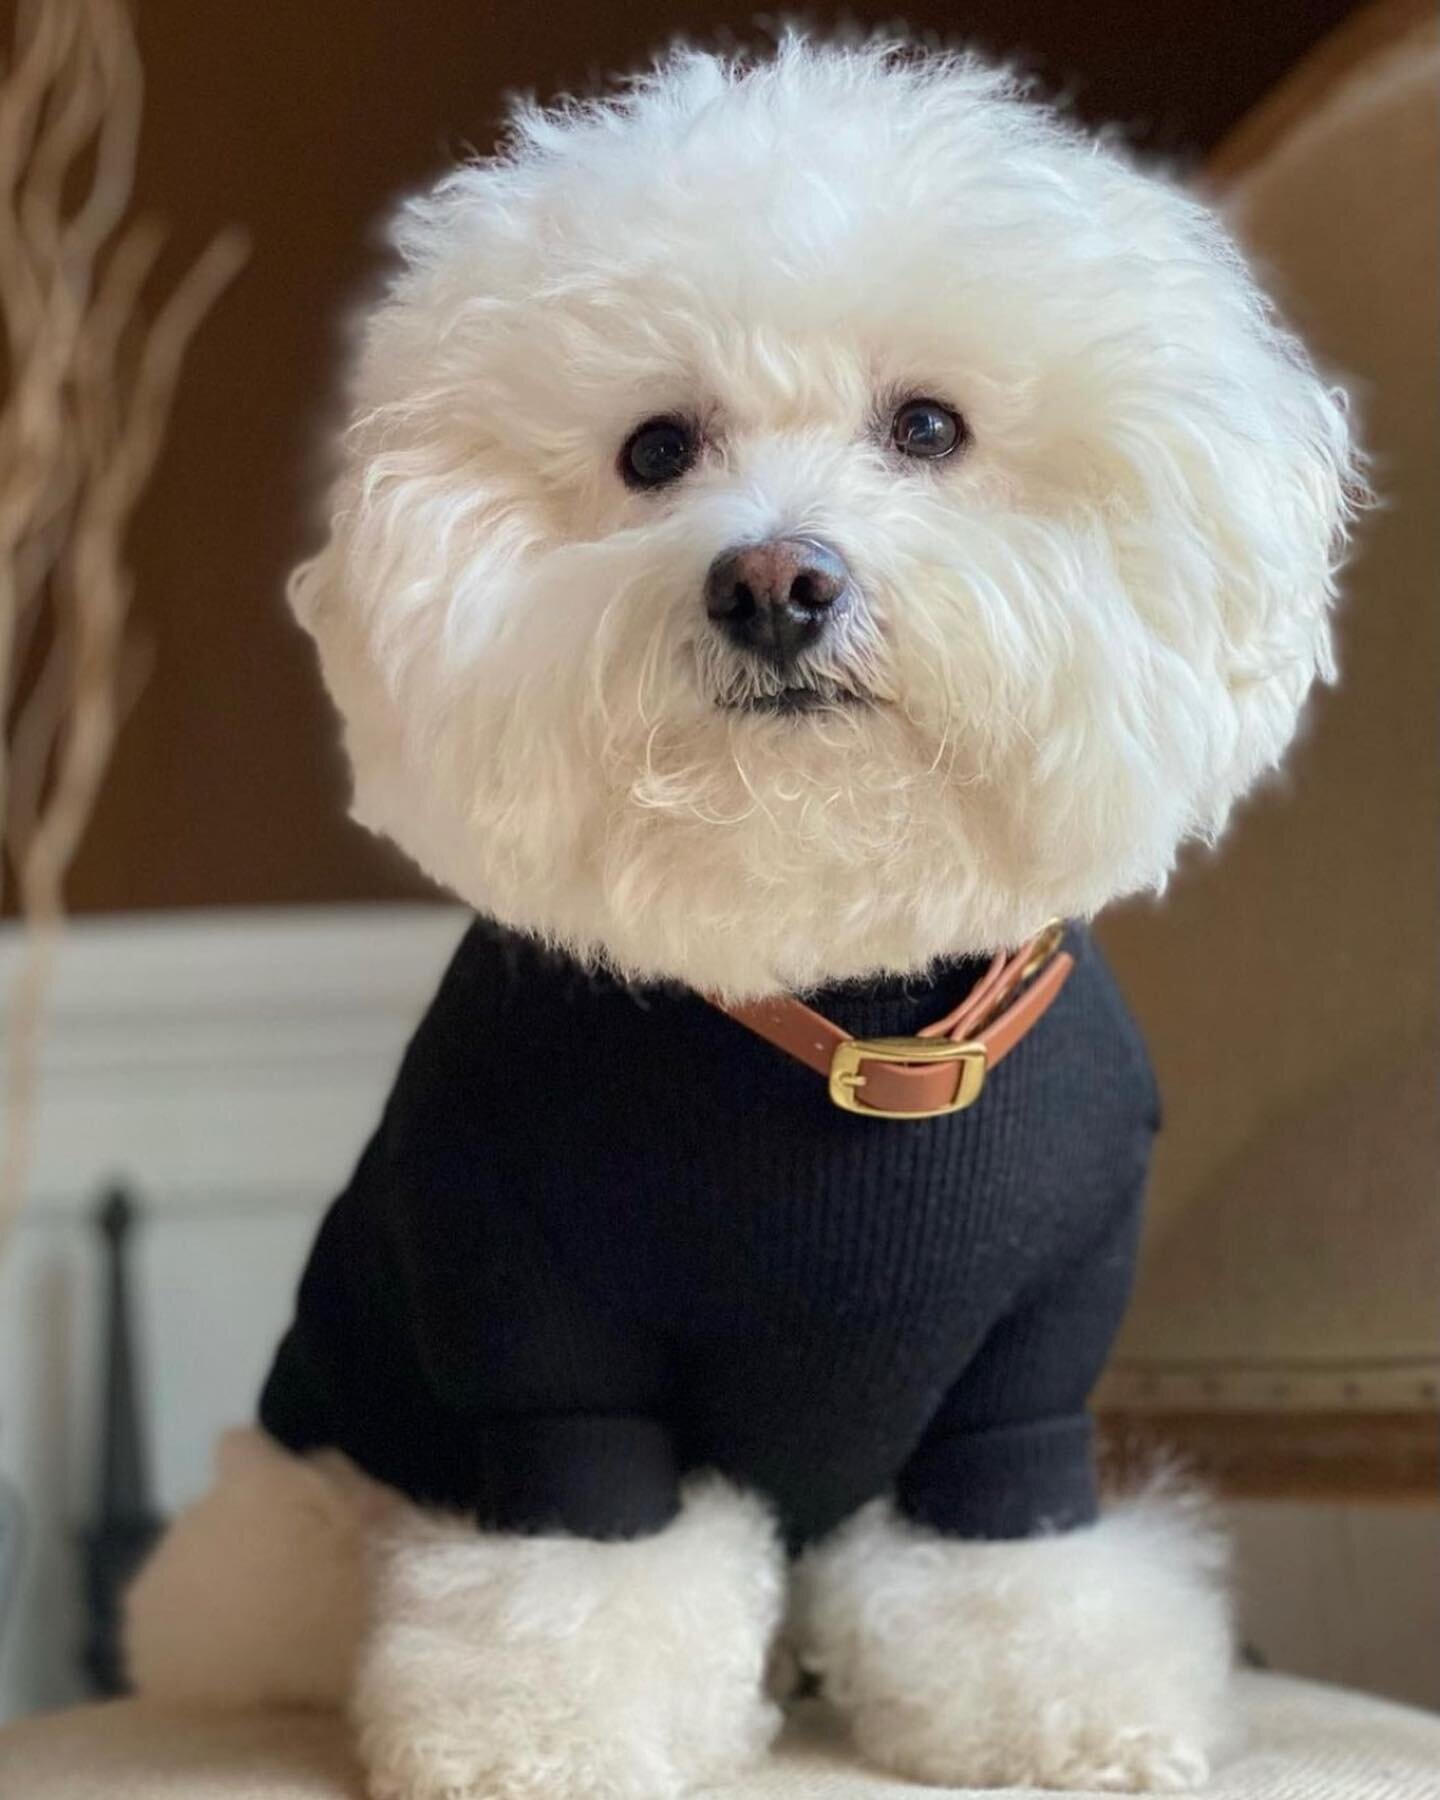 Ok, it was the luxe sweater and vegan leather collar that did it for us 😩

Our #FeatureFriday goes to Krispy Kreme 🤩🐶
⁣
📸 @krispykremethebichon thanks for the tag ⁣
⁣
Tag @bestinshawdogshowdc to be featured ❤️
⁣
⁣
⁣
⁣
⁣
⁣
⁣
#bestinshawdogshowdc #